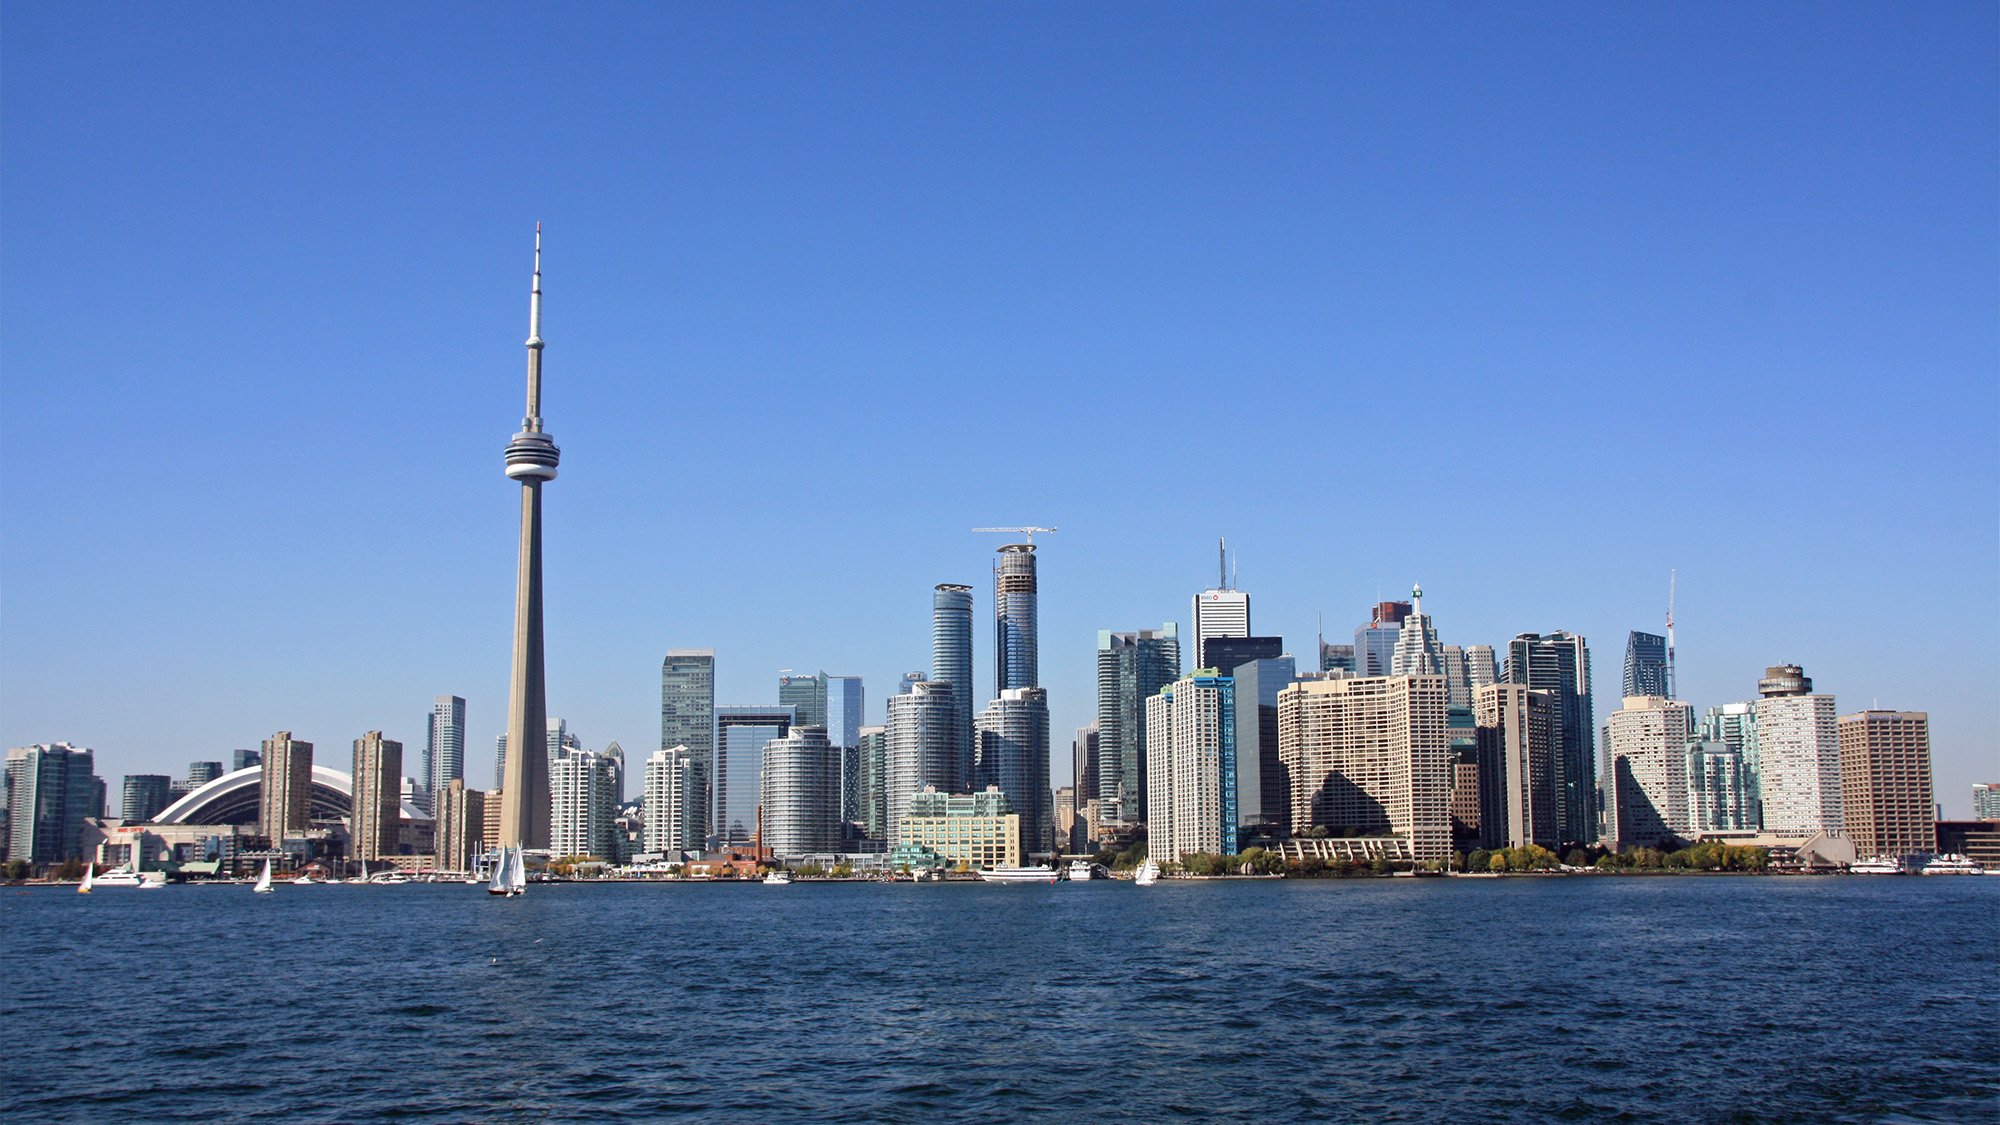 The Toronto Waterfront. Image: Christine Wagner, Flickr